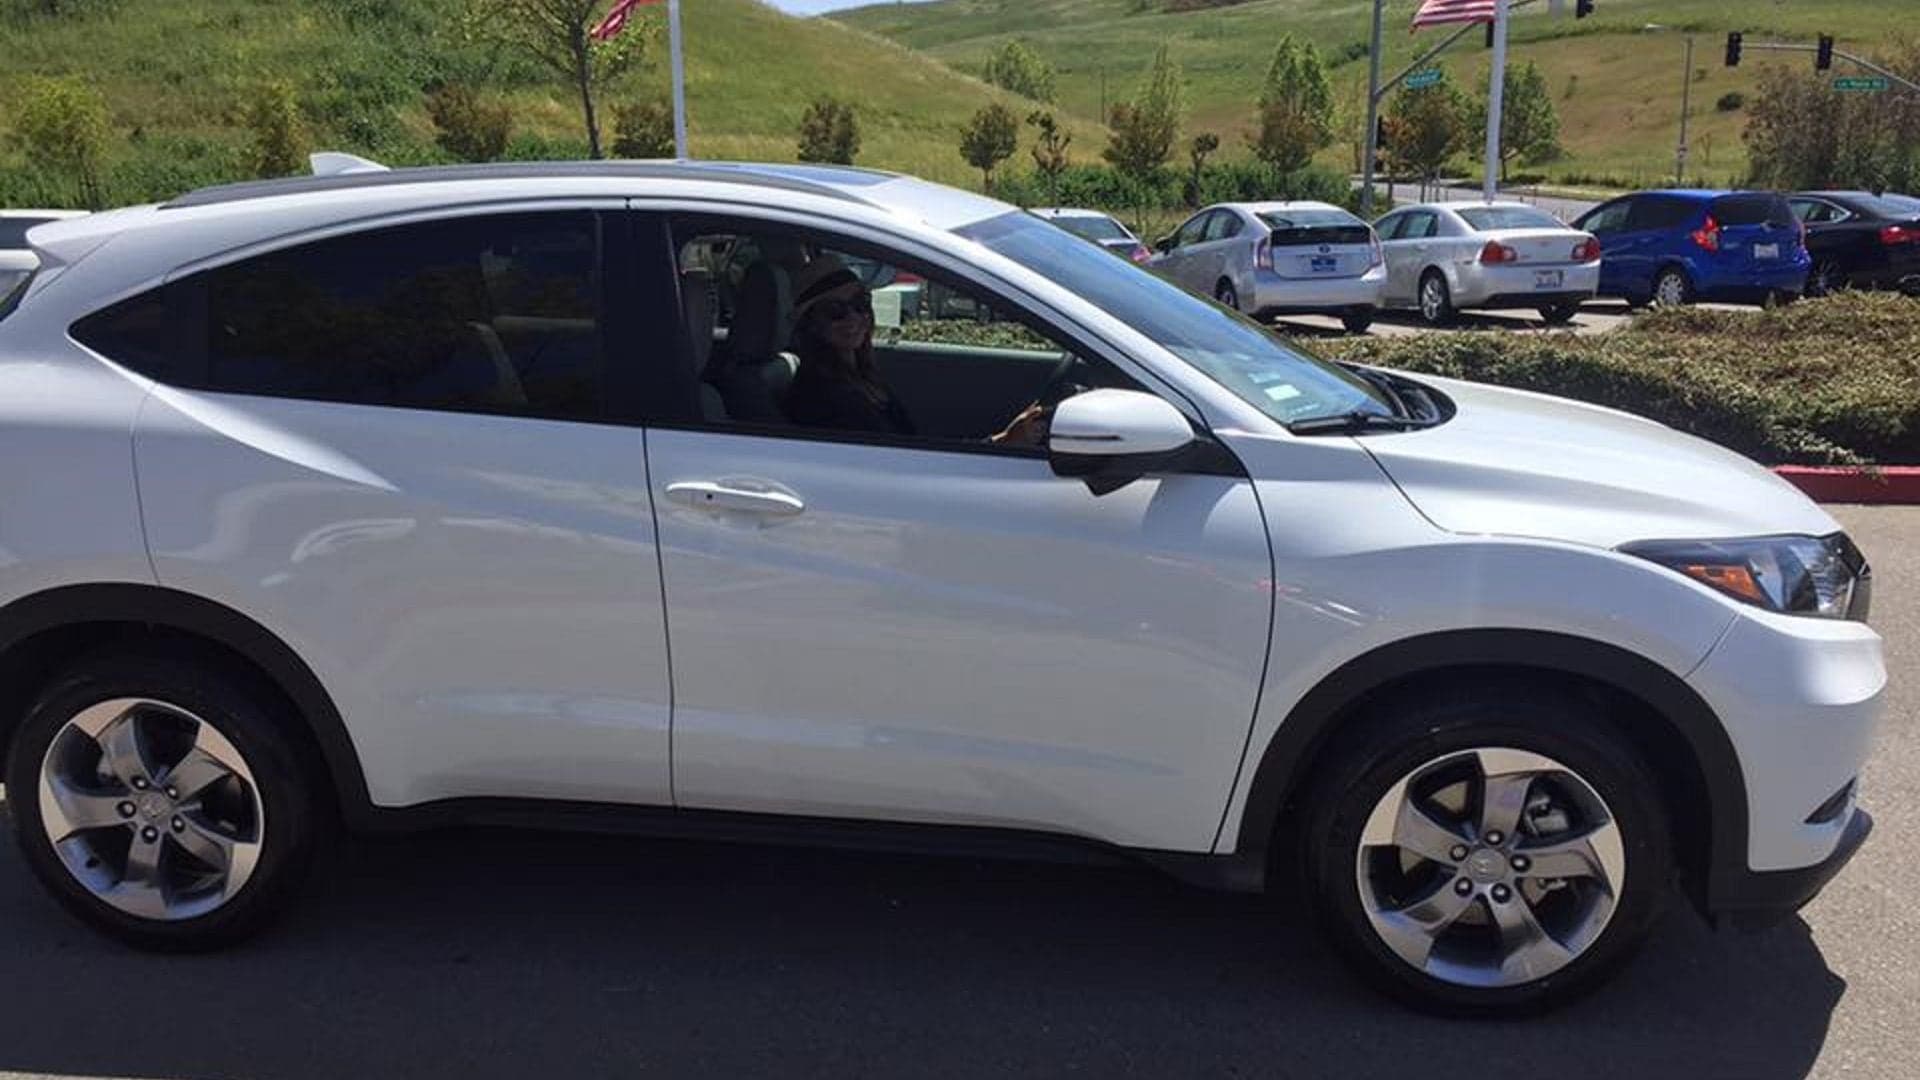 Stolen Honda HR-V Found With Lyft Stickers and 11,000 Additional Miles